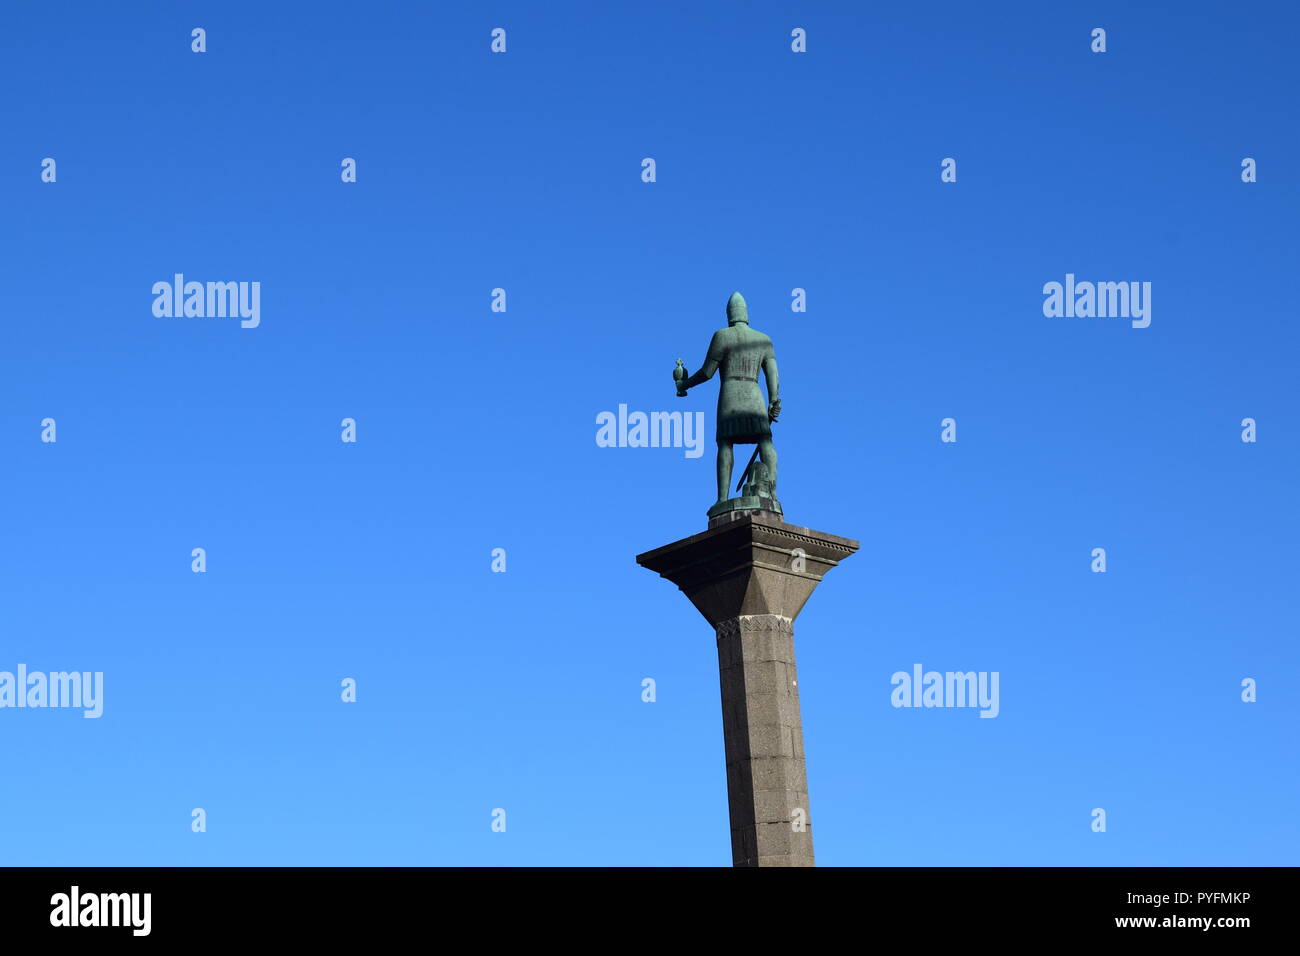 Statue of Olav Tryggvason located in exact city center, Trondheim, Norway stands against the blue sky. Stock Photo